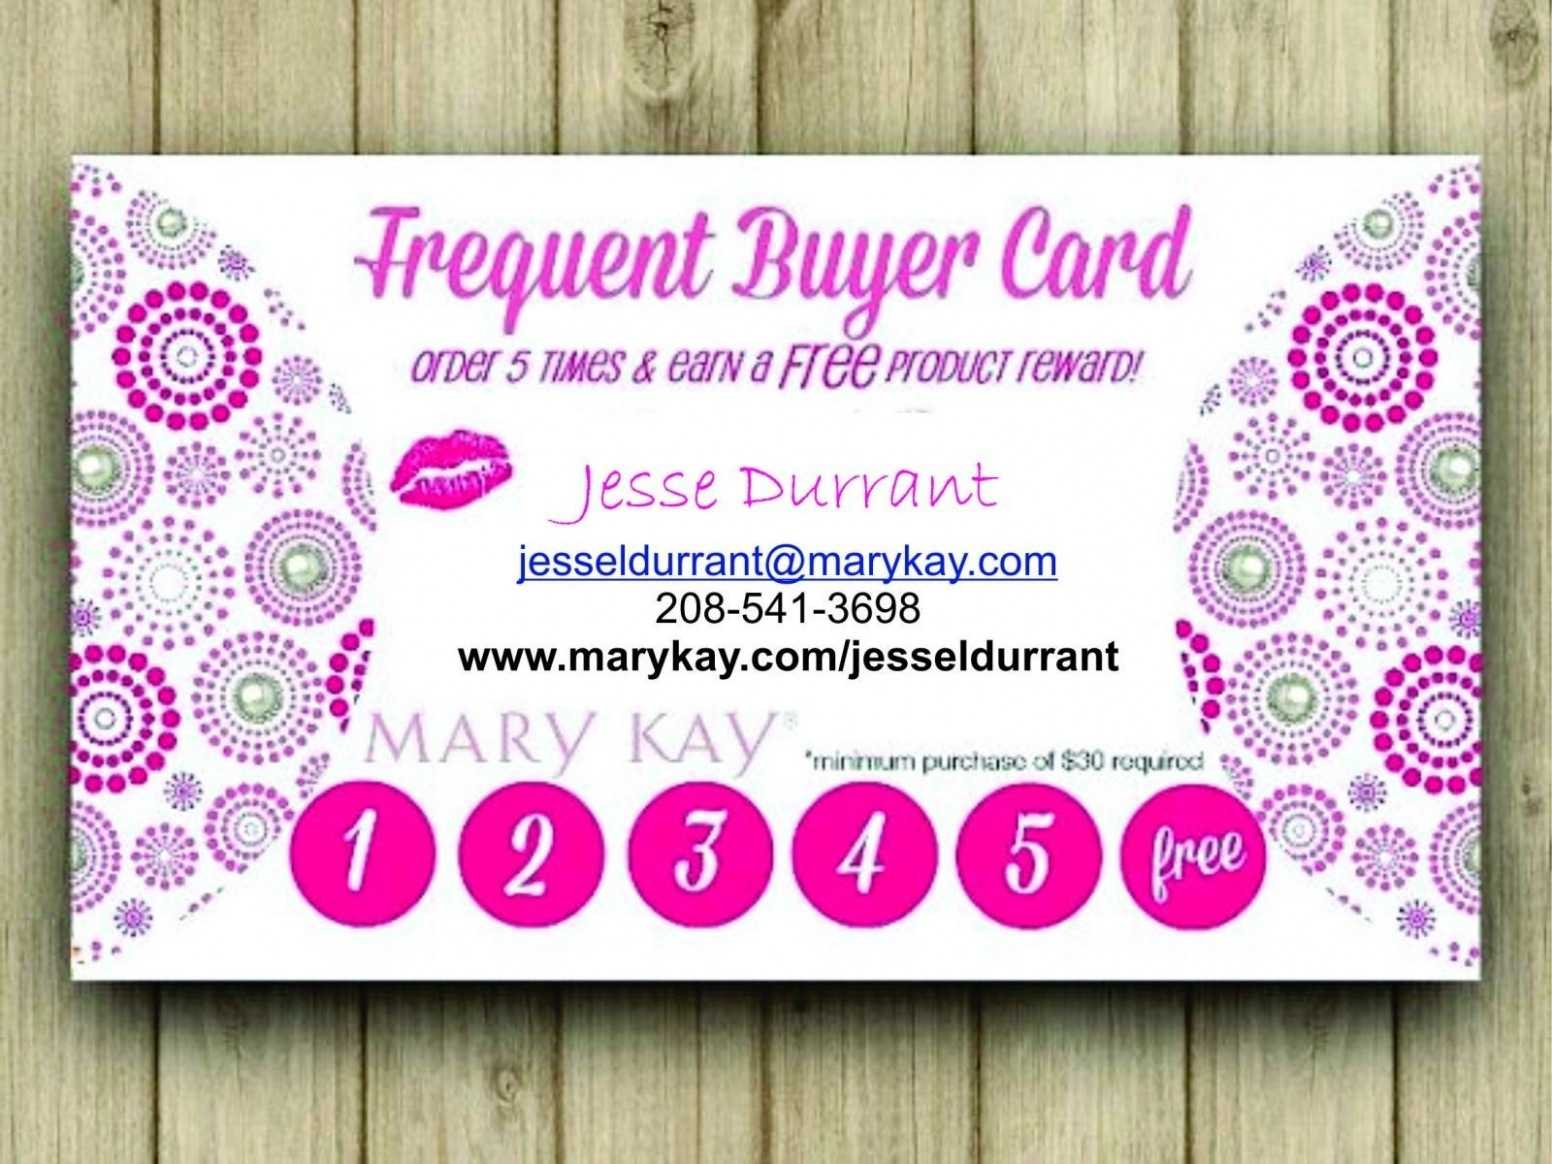 Mary Kay Business Cards | Business Cards For Mary Kay Business Cards Templates Free